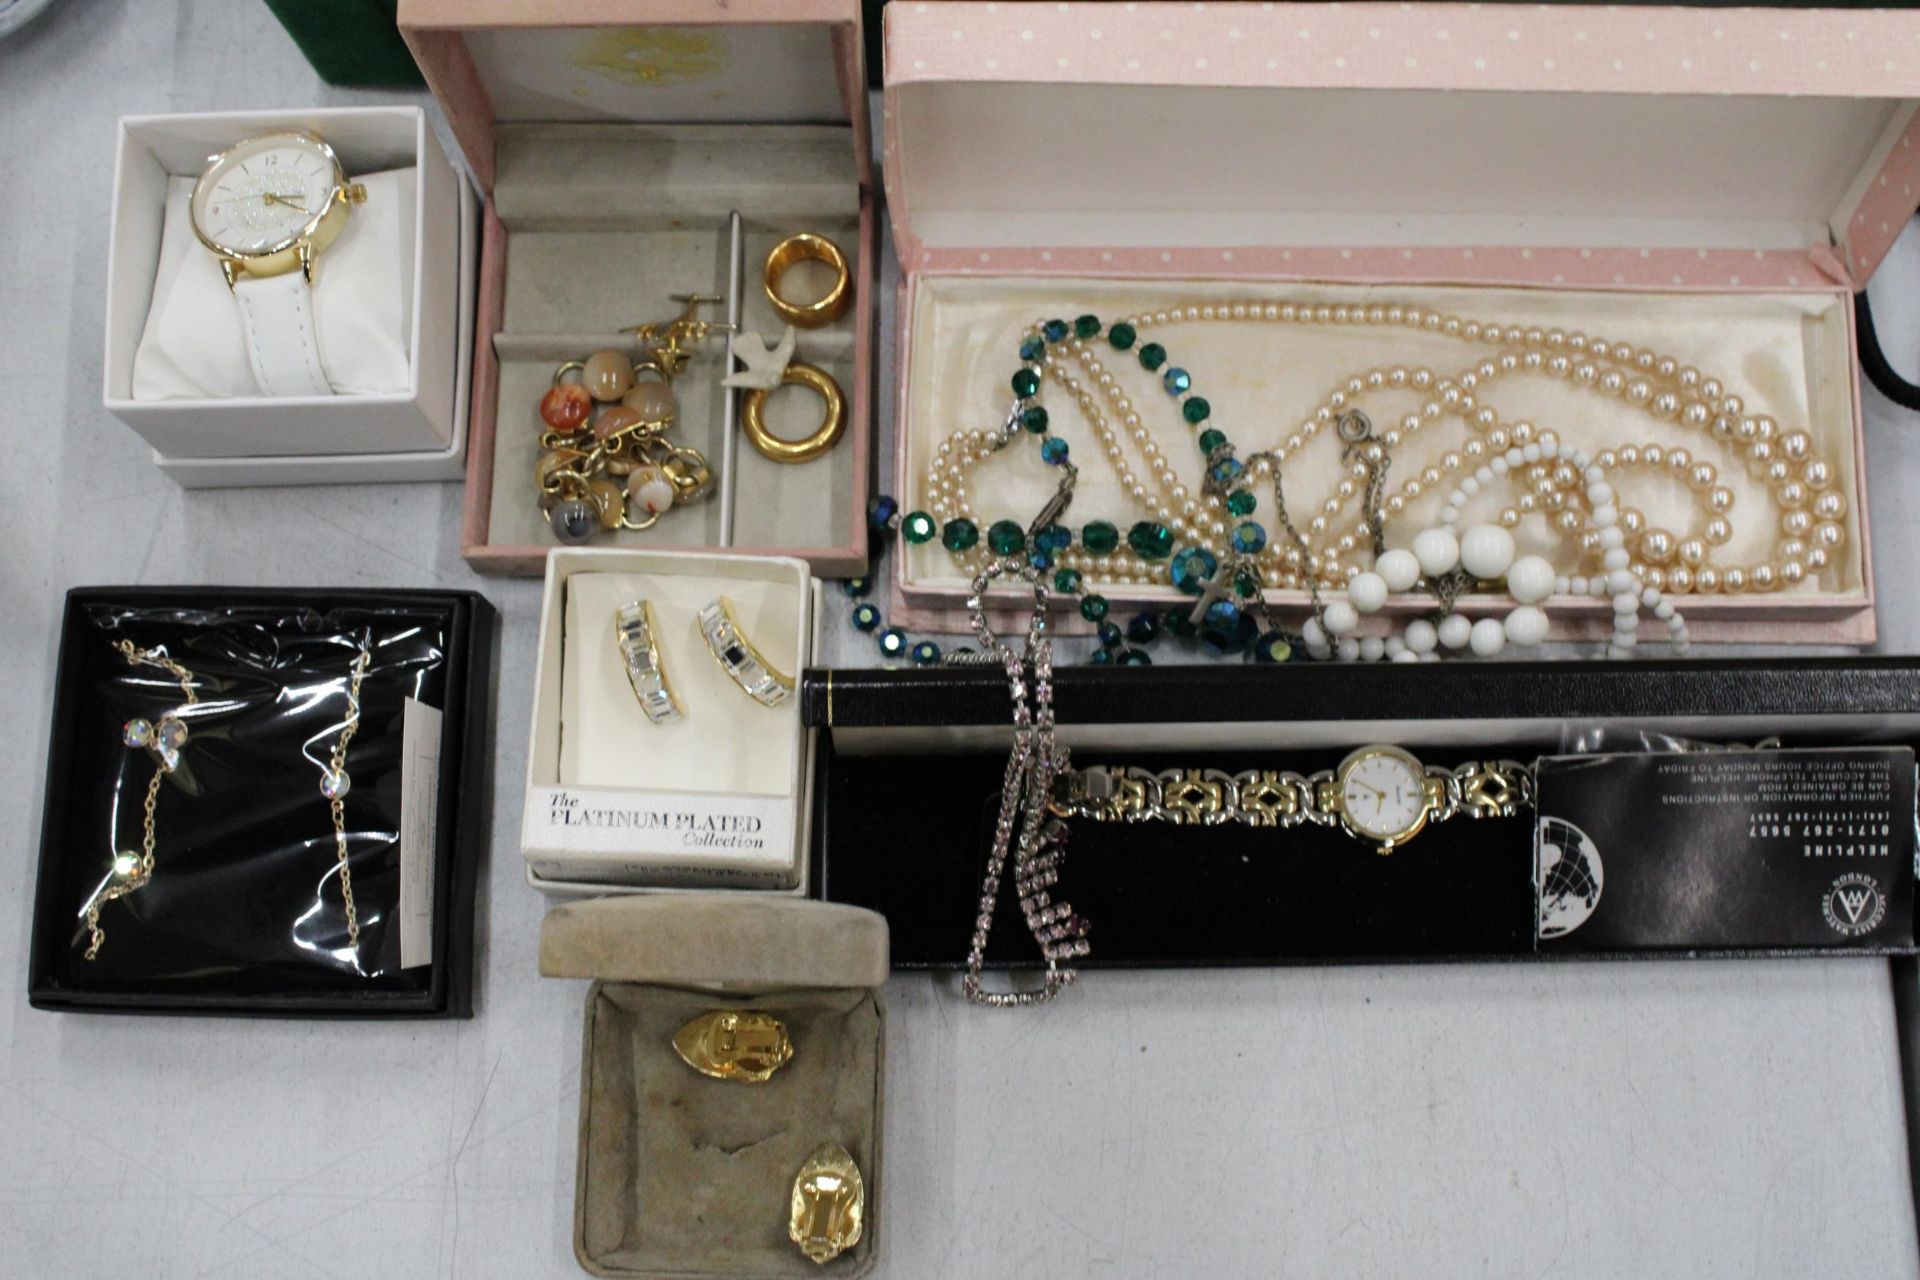 A QUANTITYOF COSTUME JEWELLERY TO INCLUDE WATCHES, NECKLACES, EARRINGS, BEADS, BANGLES, ETC - Image 3 of 5